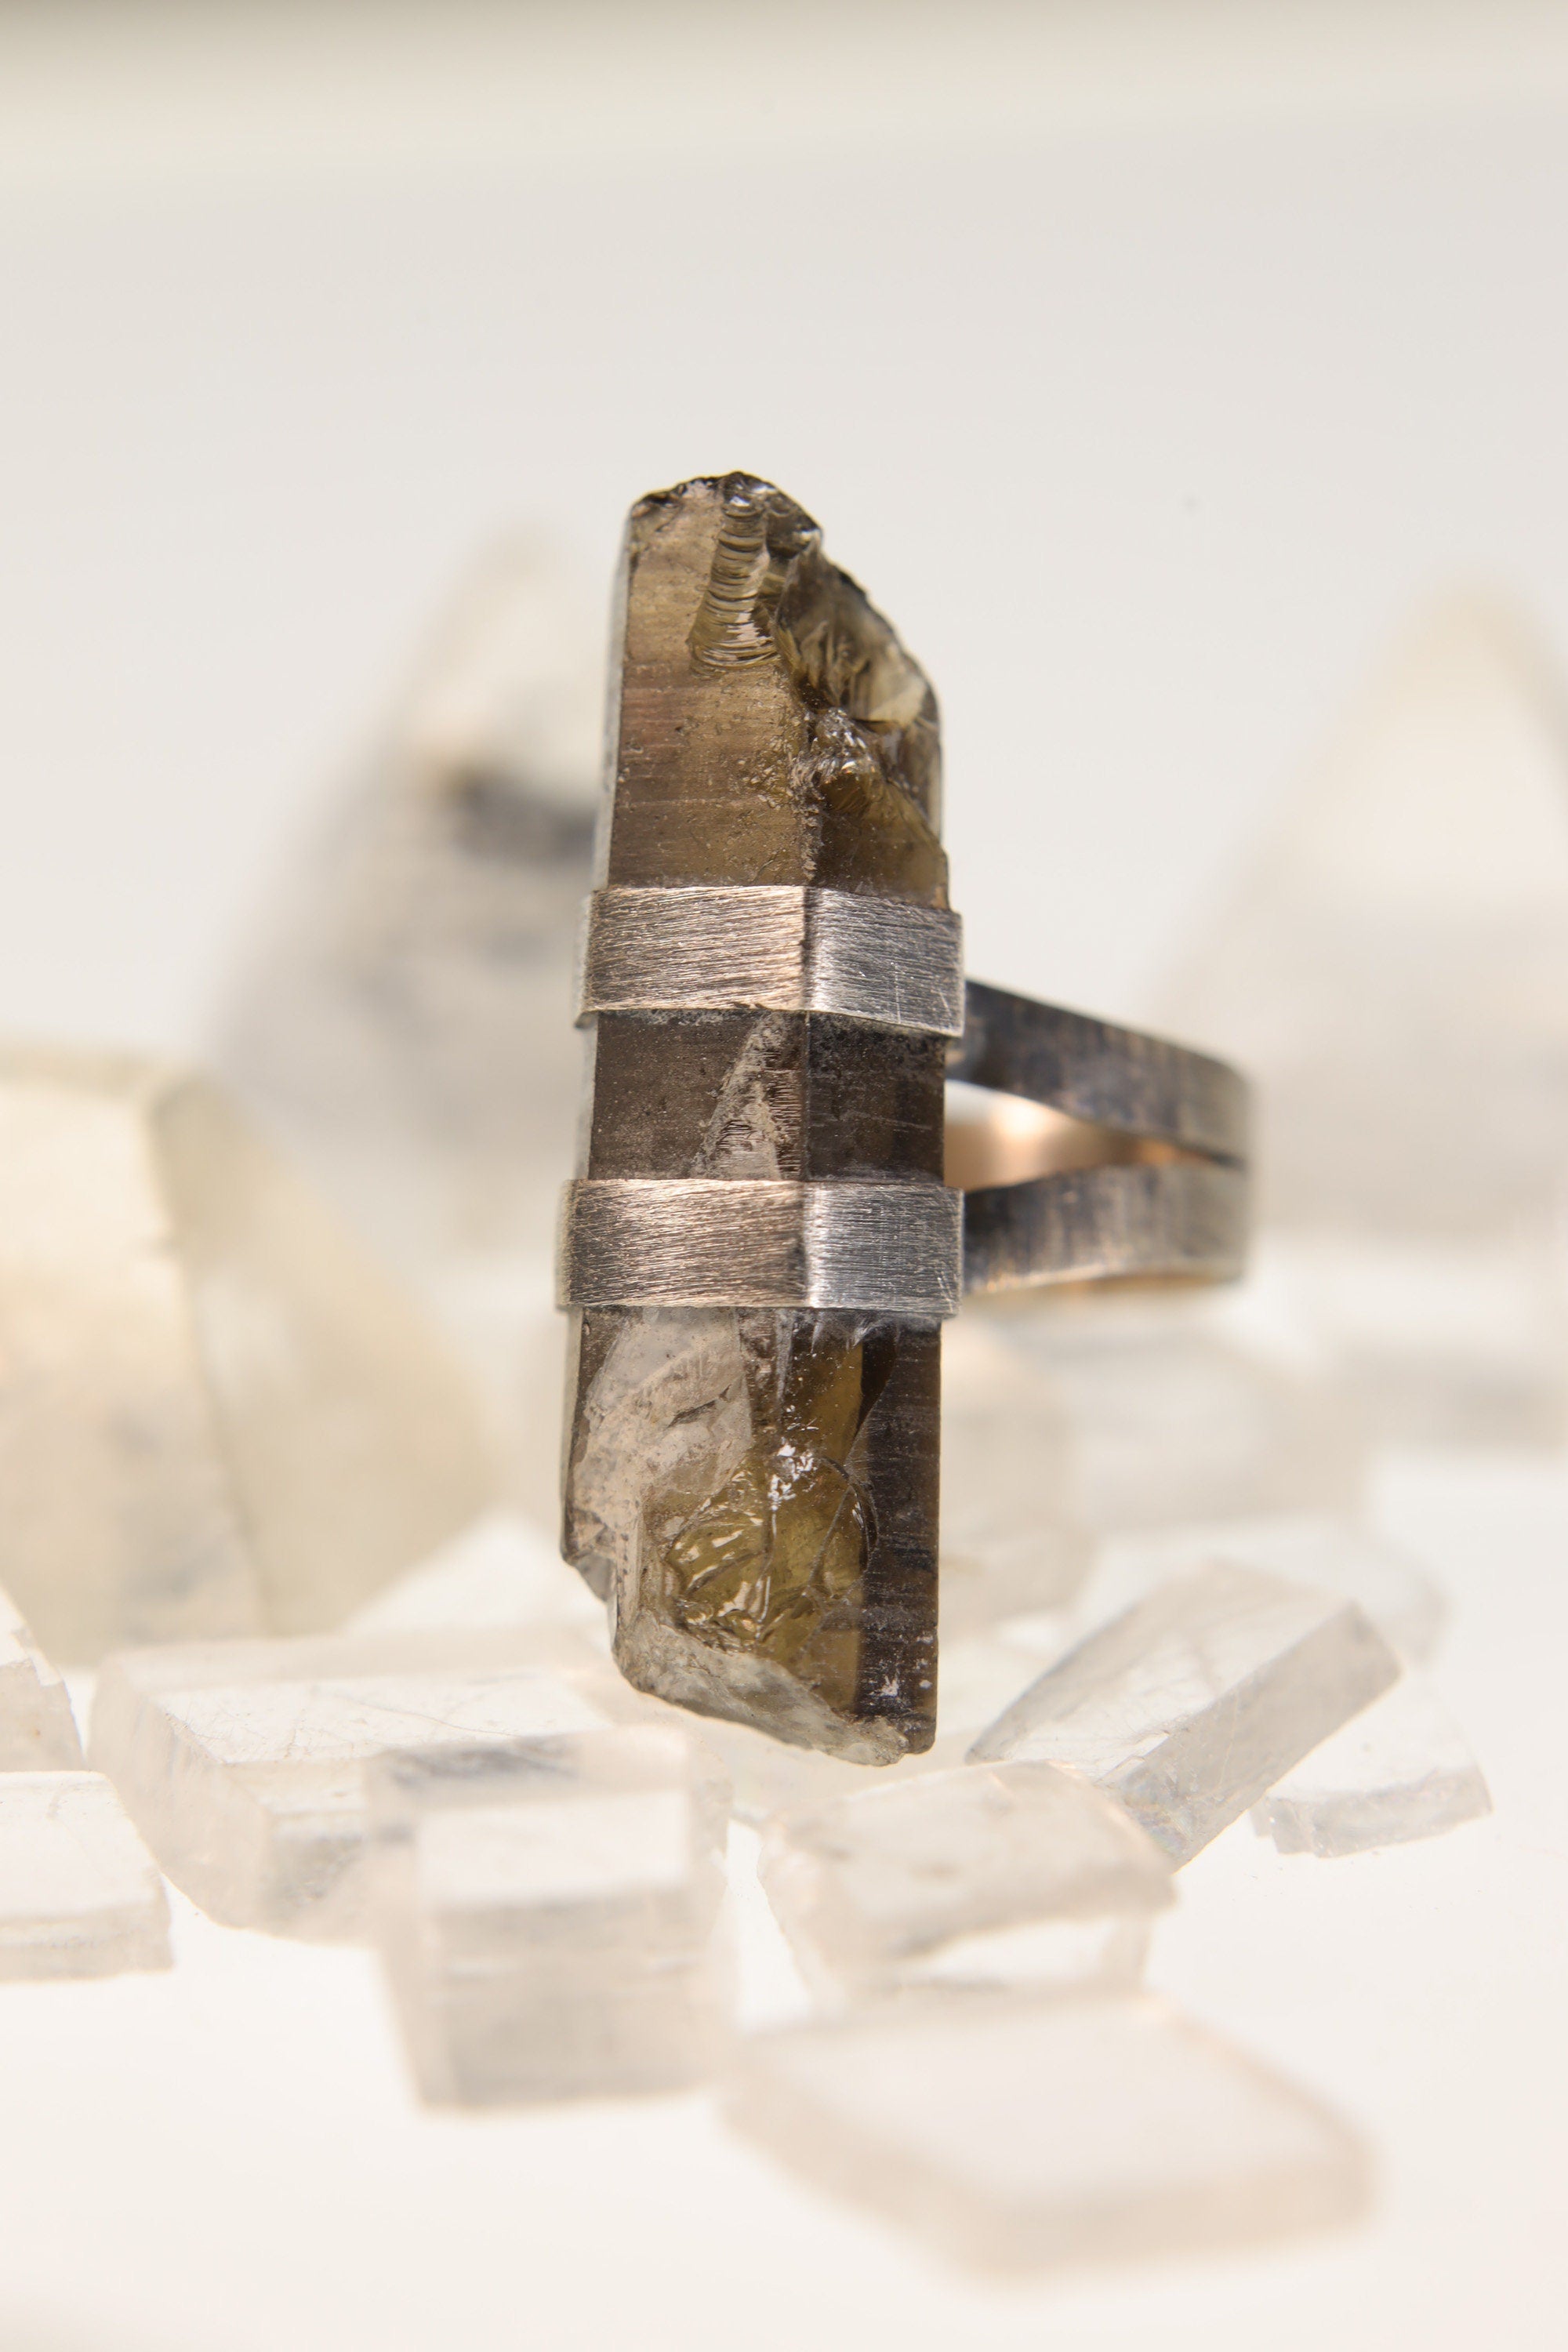 Torrington Radiance: Textured & Oxidised Sterling Silver Ring with Natural Australian Smoky Citrine Quartz - Size 6 - NO/01